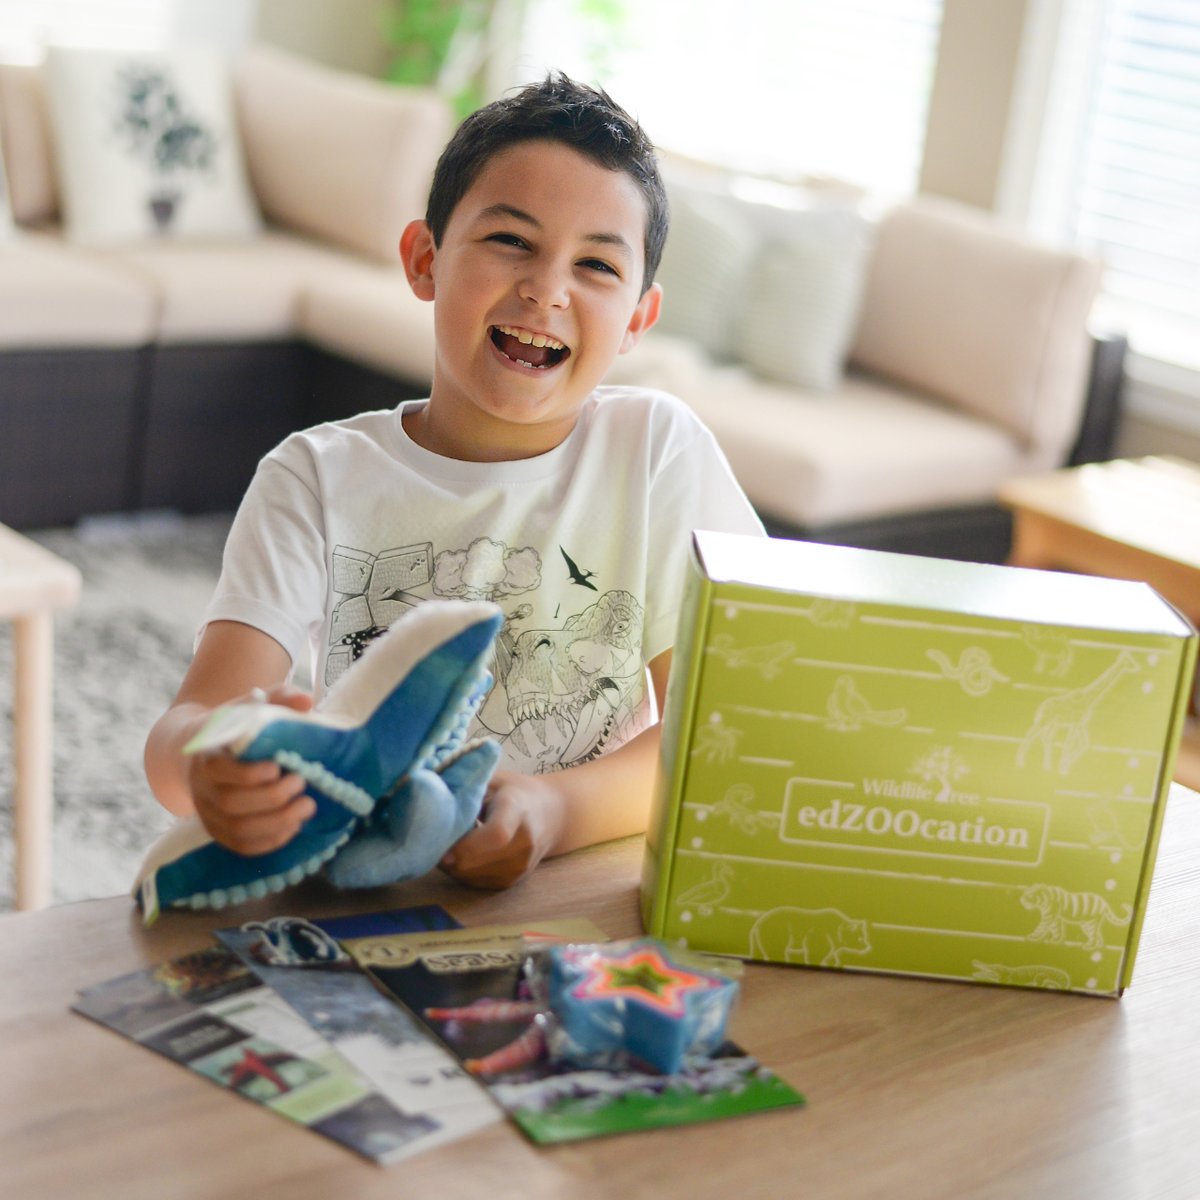 Our subscription boxes are designed to inspire big smiles 😊📦💖 #edZOOcation #edZOOcationBox #kidssubscriptionbox #kidseducationalactivities #subscriptionbox